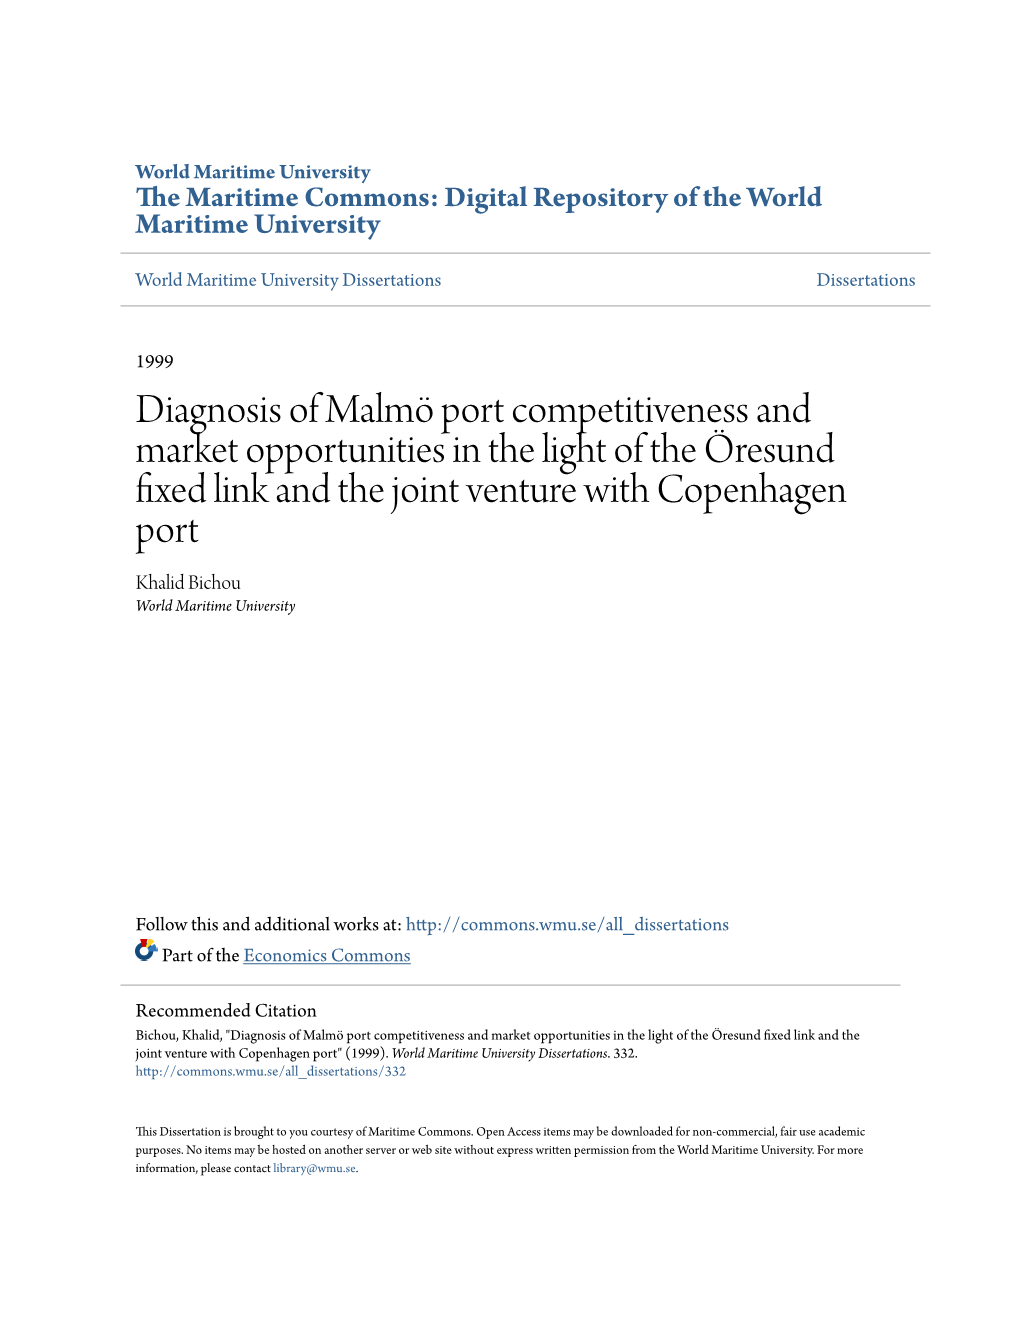 Diagnosis of Malmö Port Competitiveness and Market